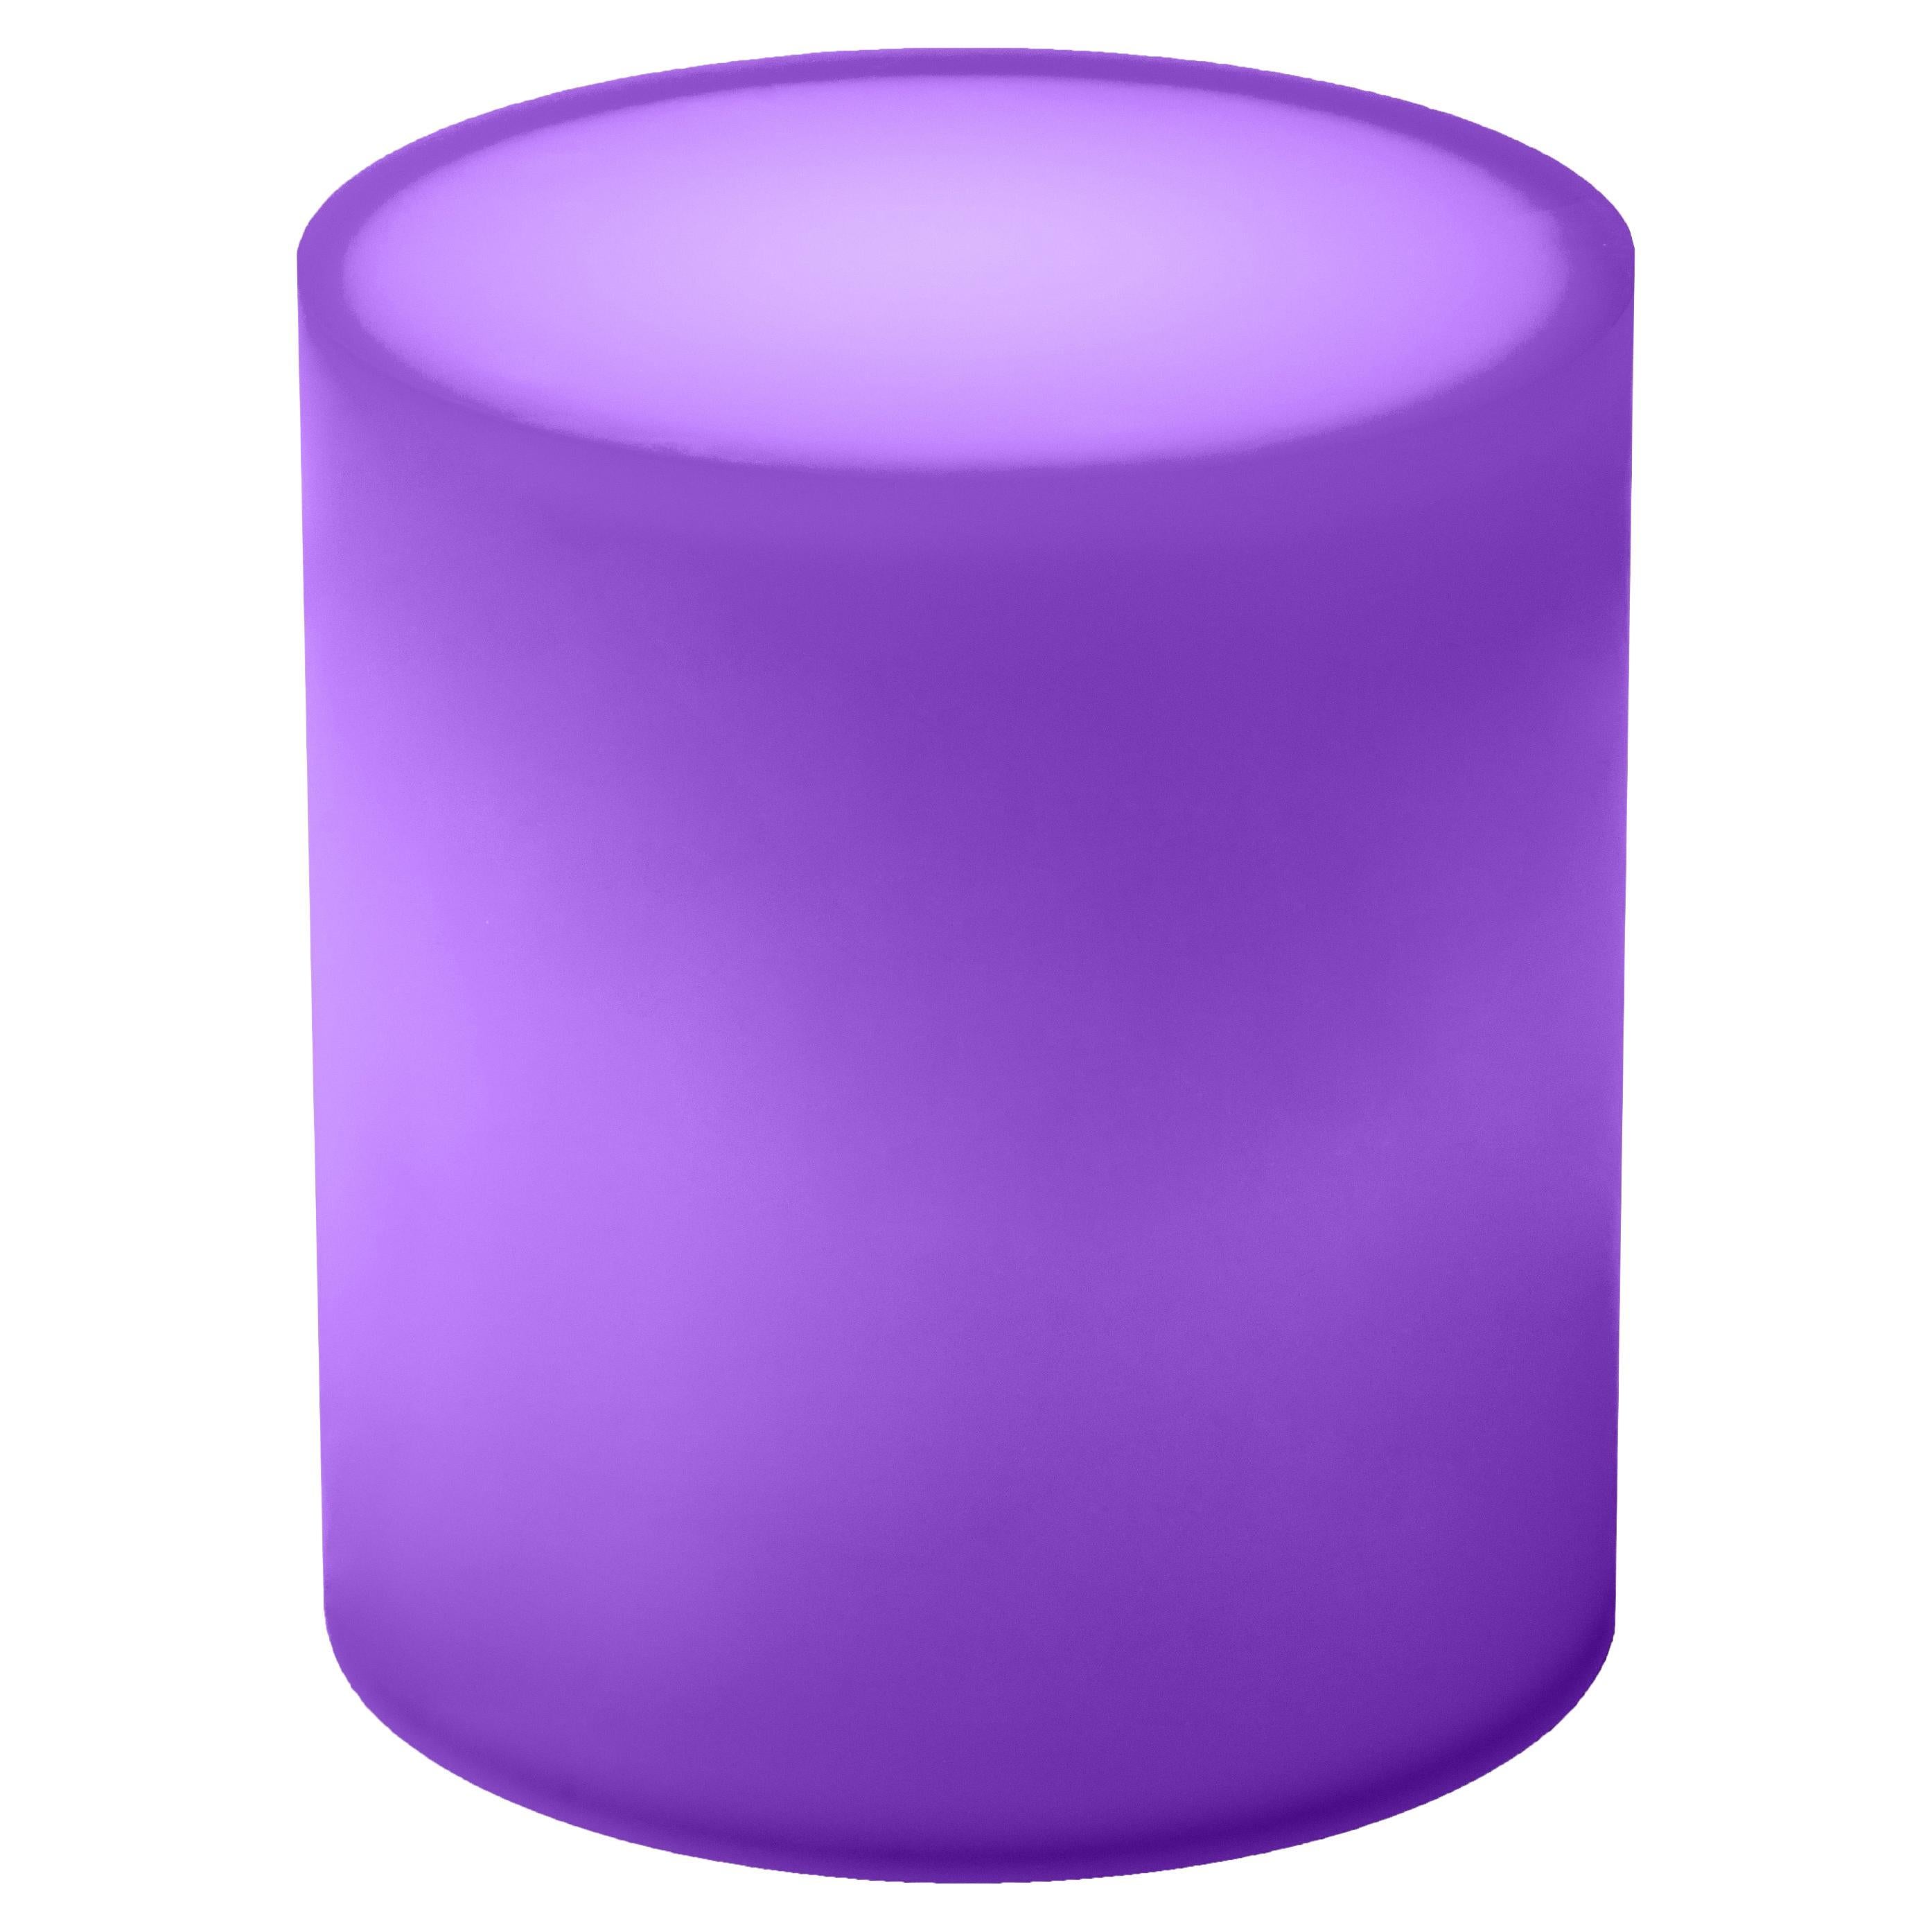 Drum Resin Side Table/Stool In Purple by Facture, Represented by Tuleste Factory